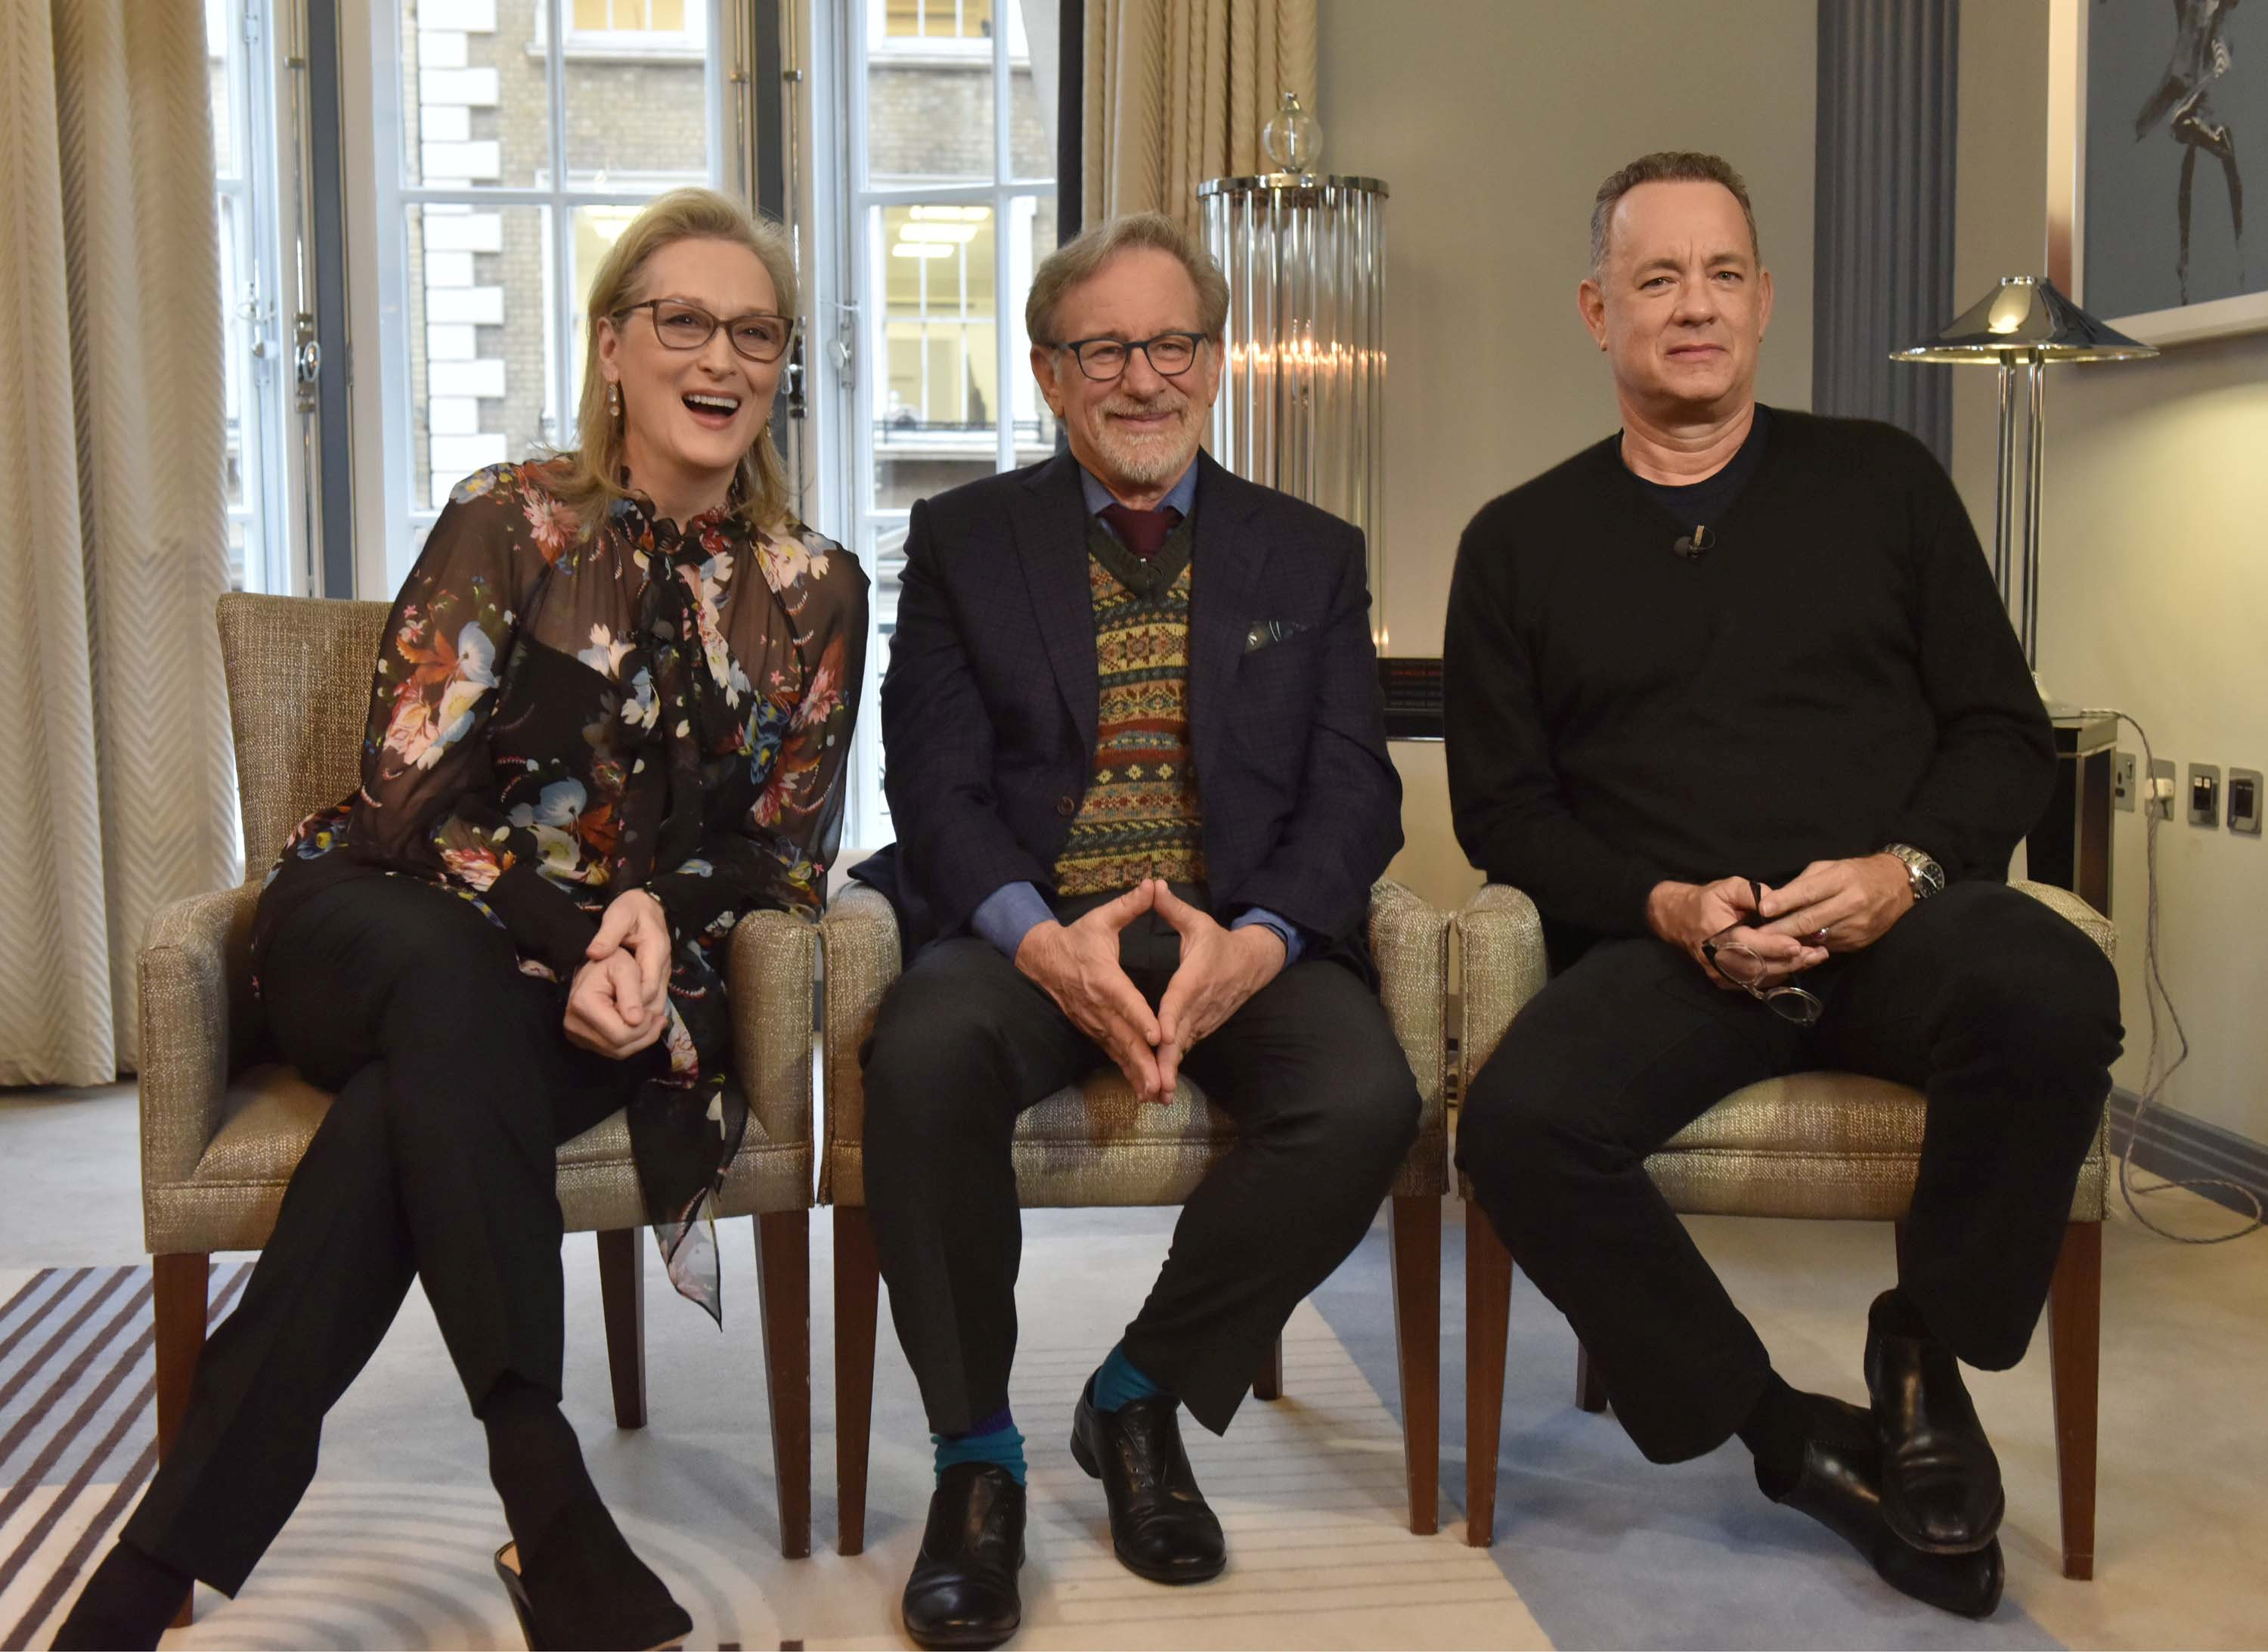 Actors Meryl Streep and Tom Hanks and director Steven Spielberg are seen appearing in an undated pre-recorded interview for the BBC's Andrew Marr Show, in this photograph received via the BBC, in London, Britain January 14, 2018.